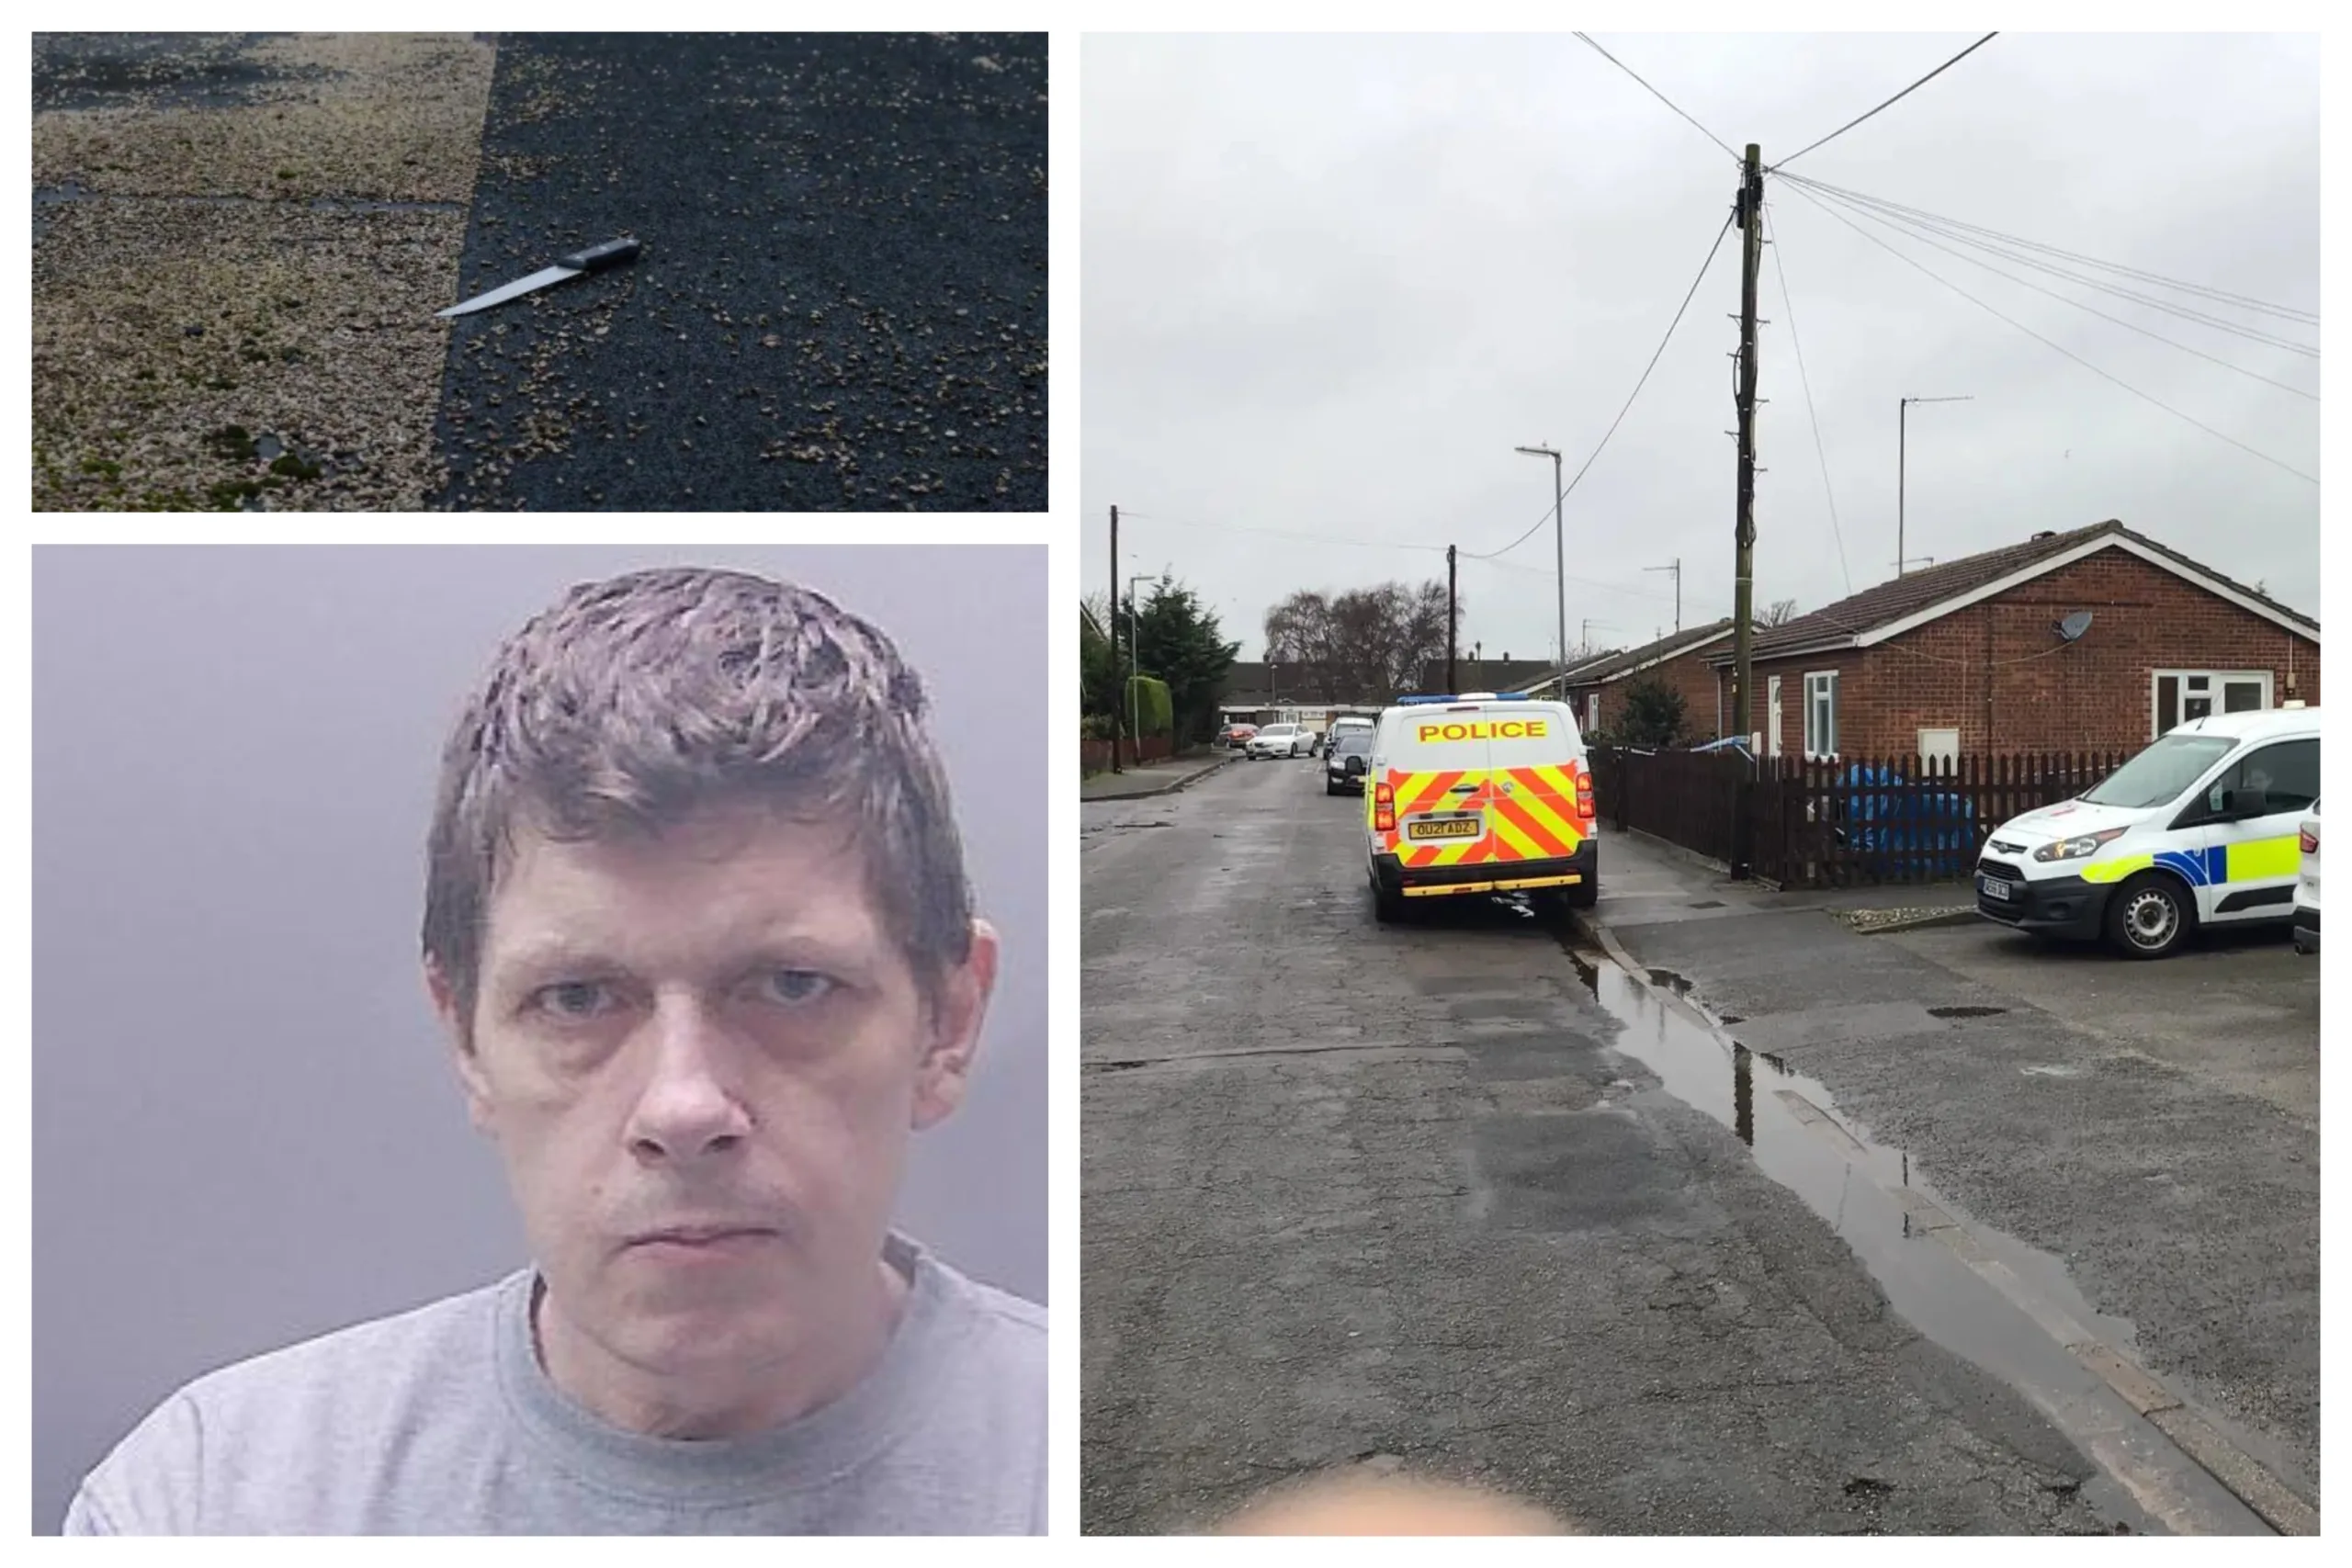 Jamie Boughen has been jailed for life for murdering 47-year-old Eliza Bibby at her home in Beechwood Road, Wisbech. The knife he used to attack her was found by police and his DNA found on the handle.